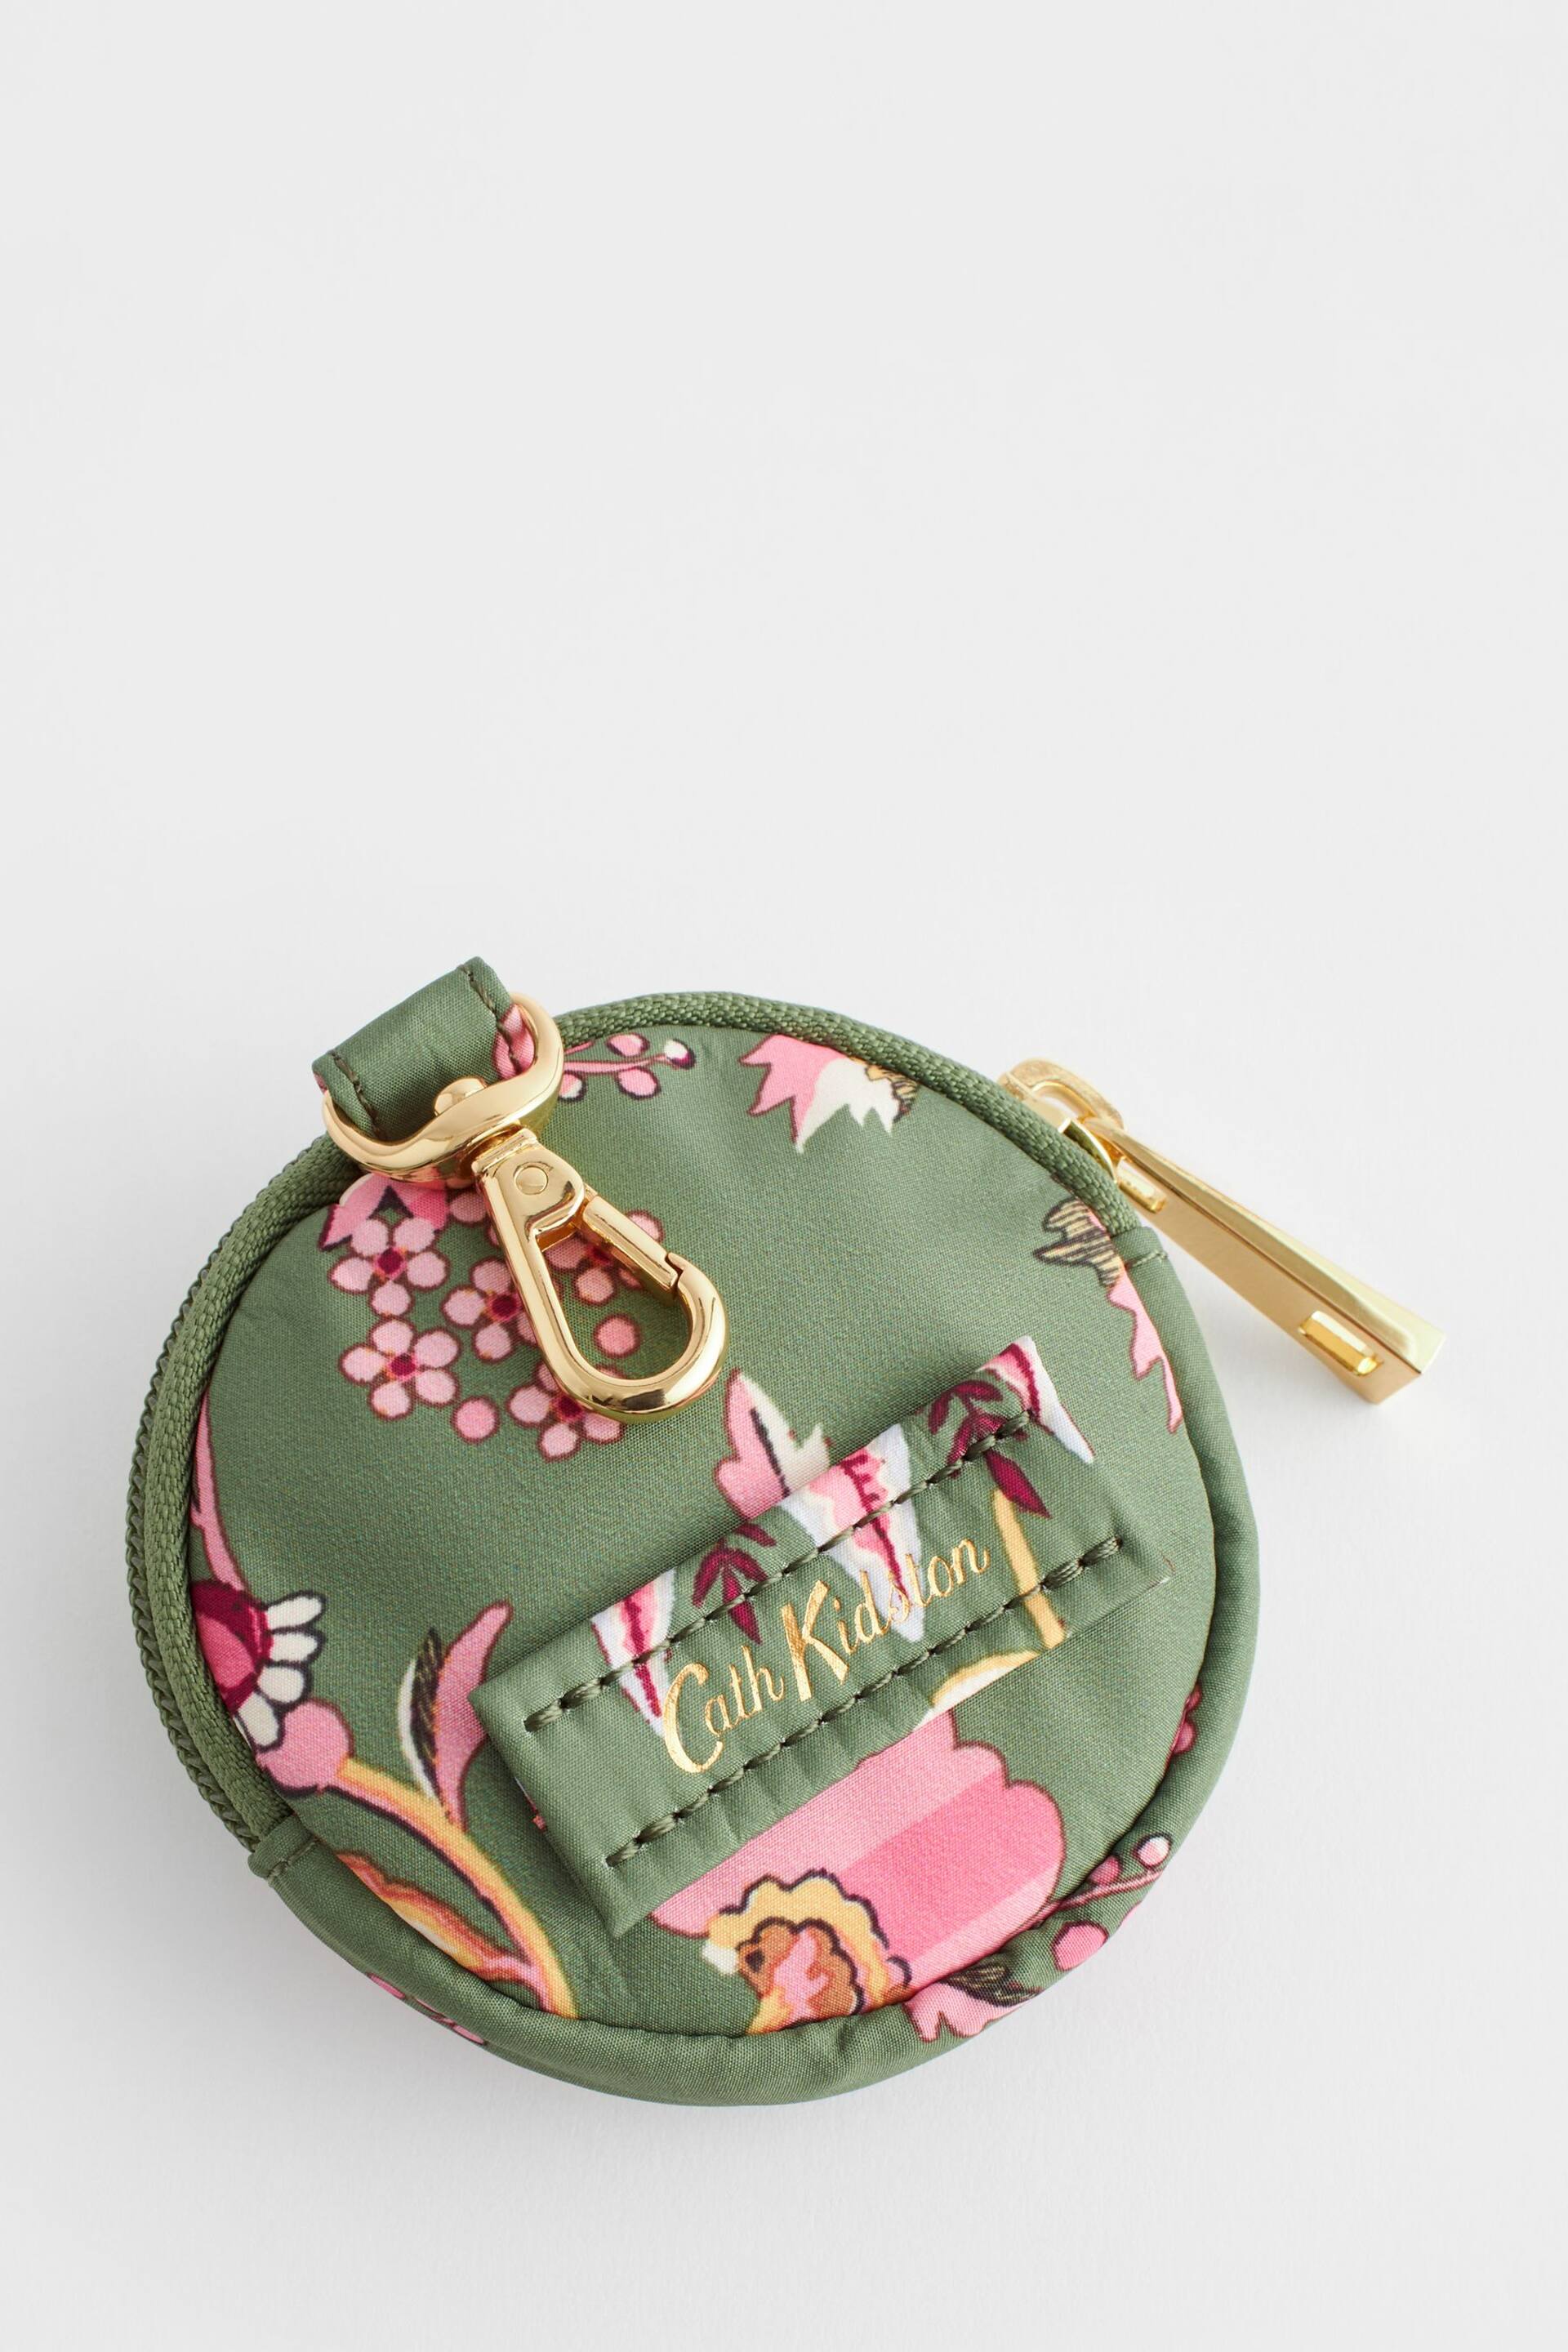 Cath Kidston Green Floral Round Coin Purse - Image 1 of 5